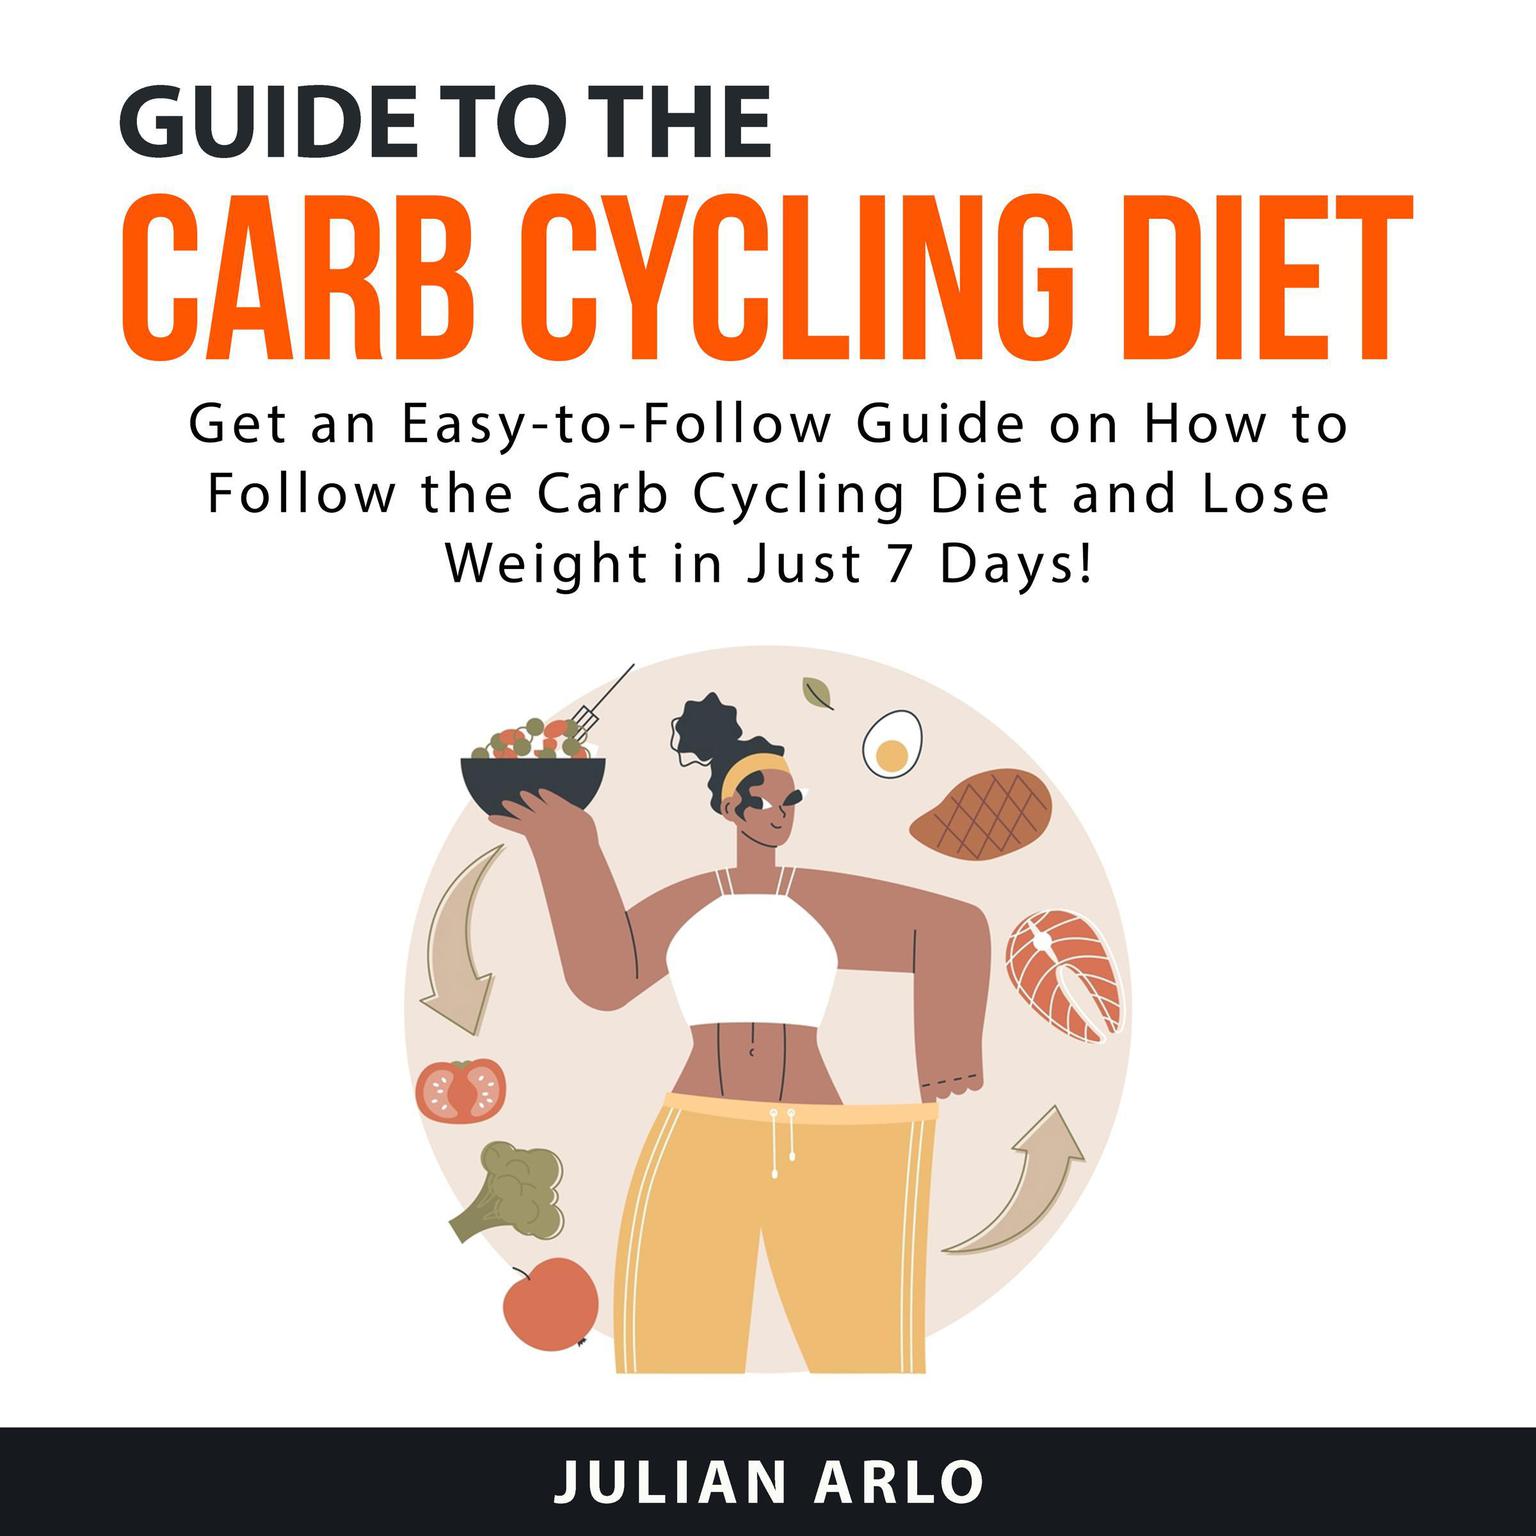 Guide to the Carb Cycling Diet: Get an Easy to Follow Guide on How to Follow the Carb Cycling Diet and Lose Weight in Just 7 Days! Audiobook, by Julian Arlo